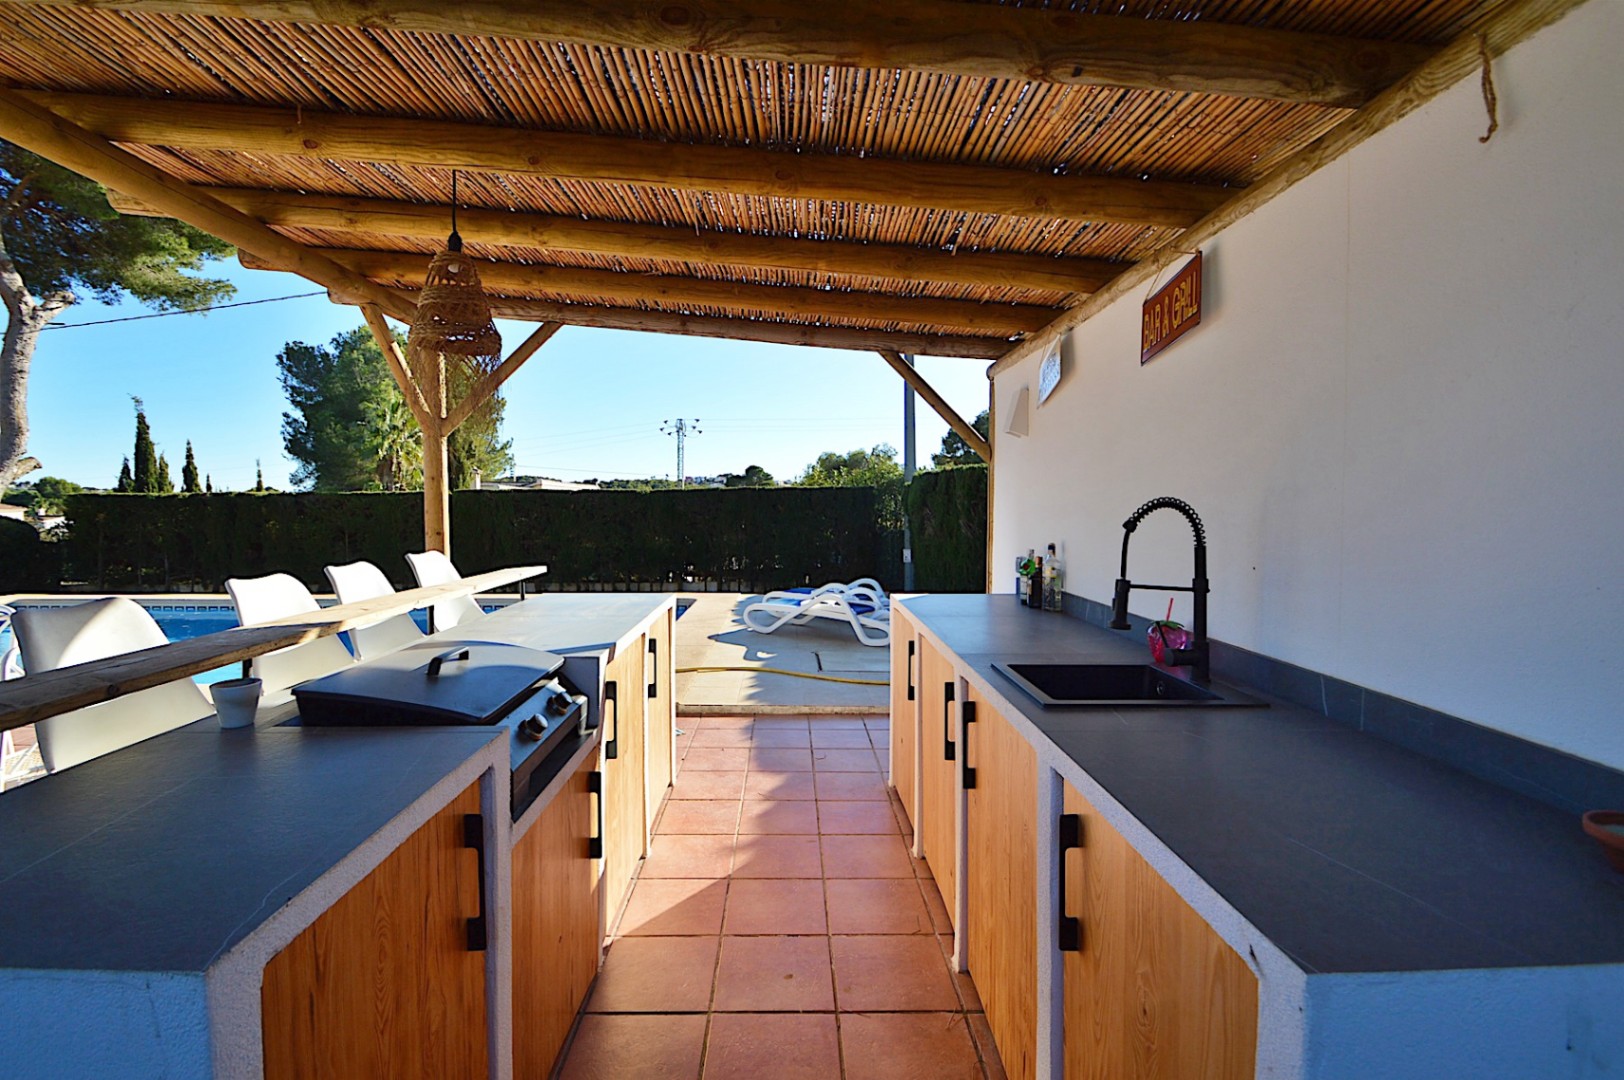 Villa For Sale in Javea with guest apartment